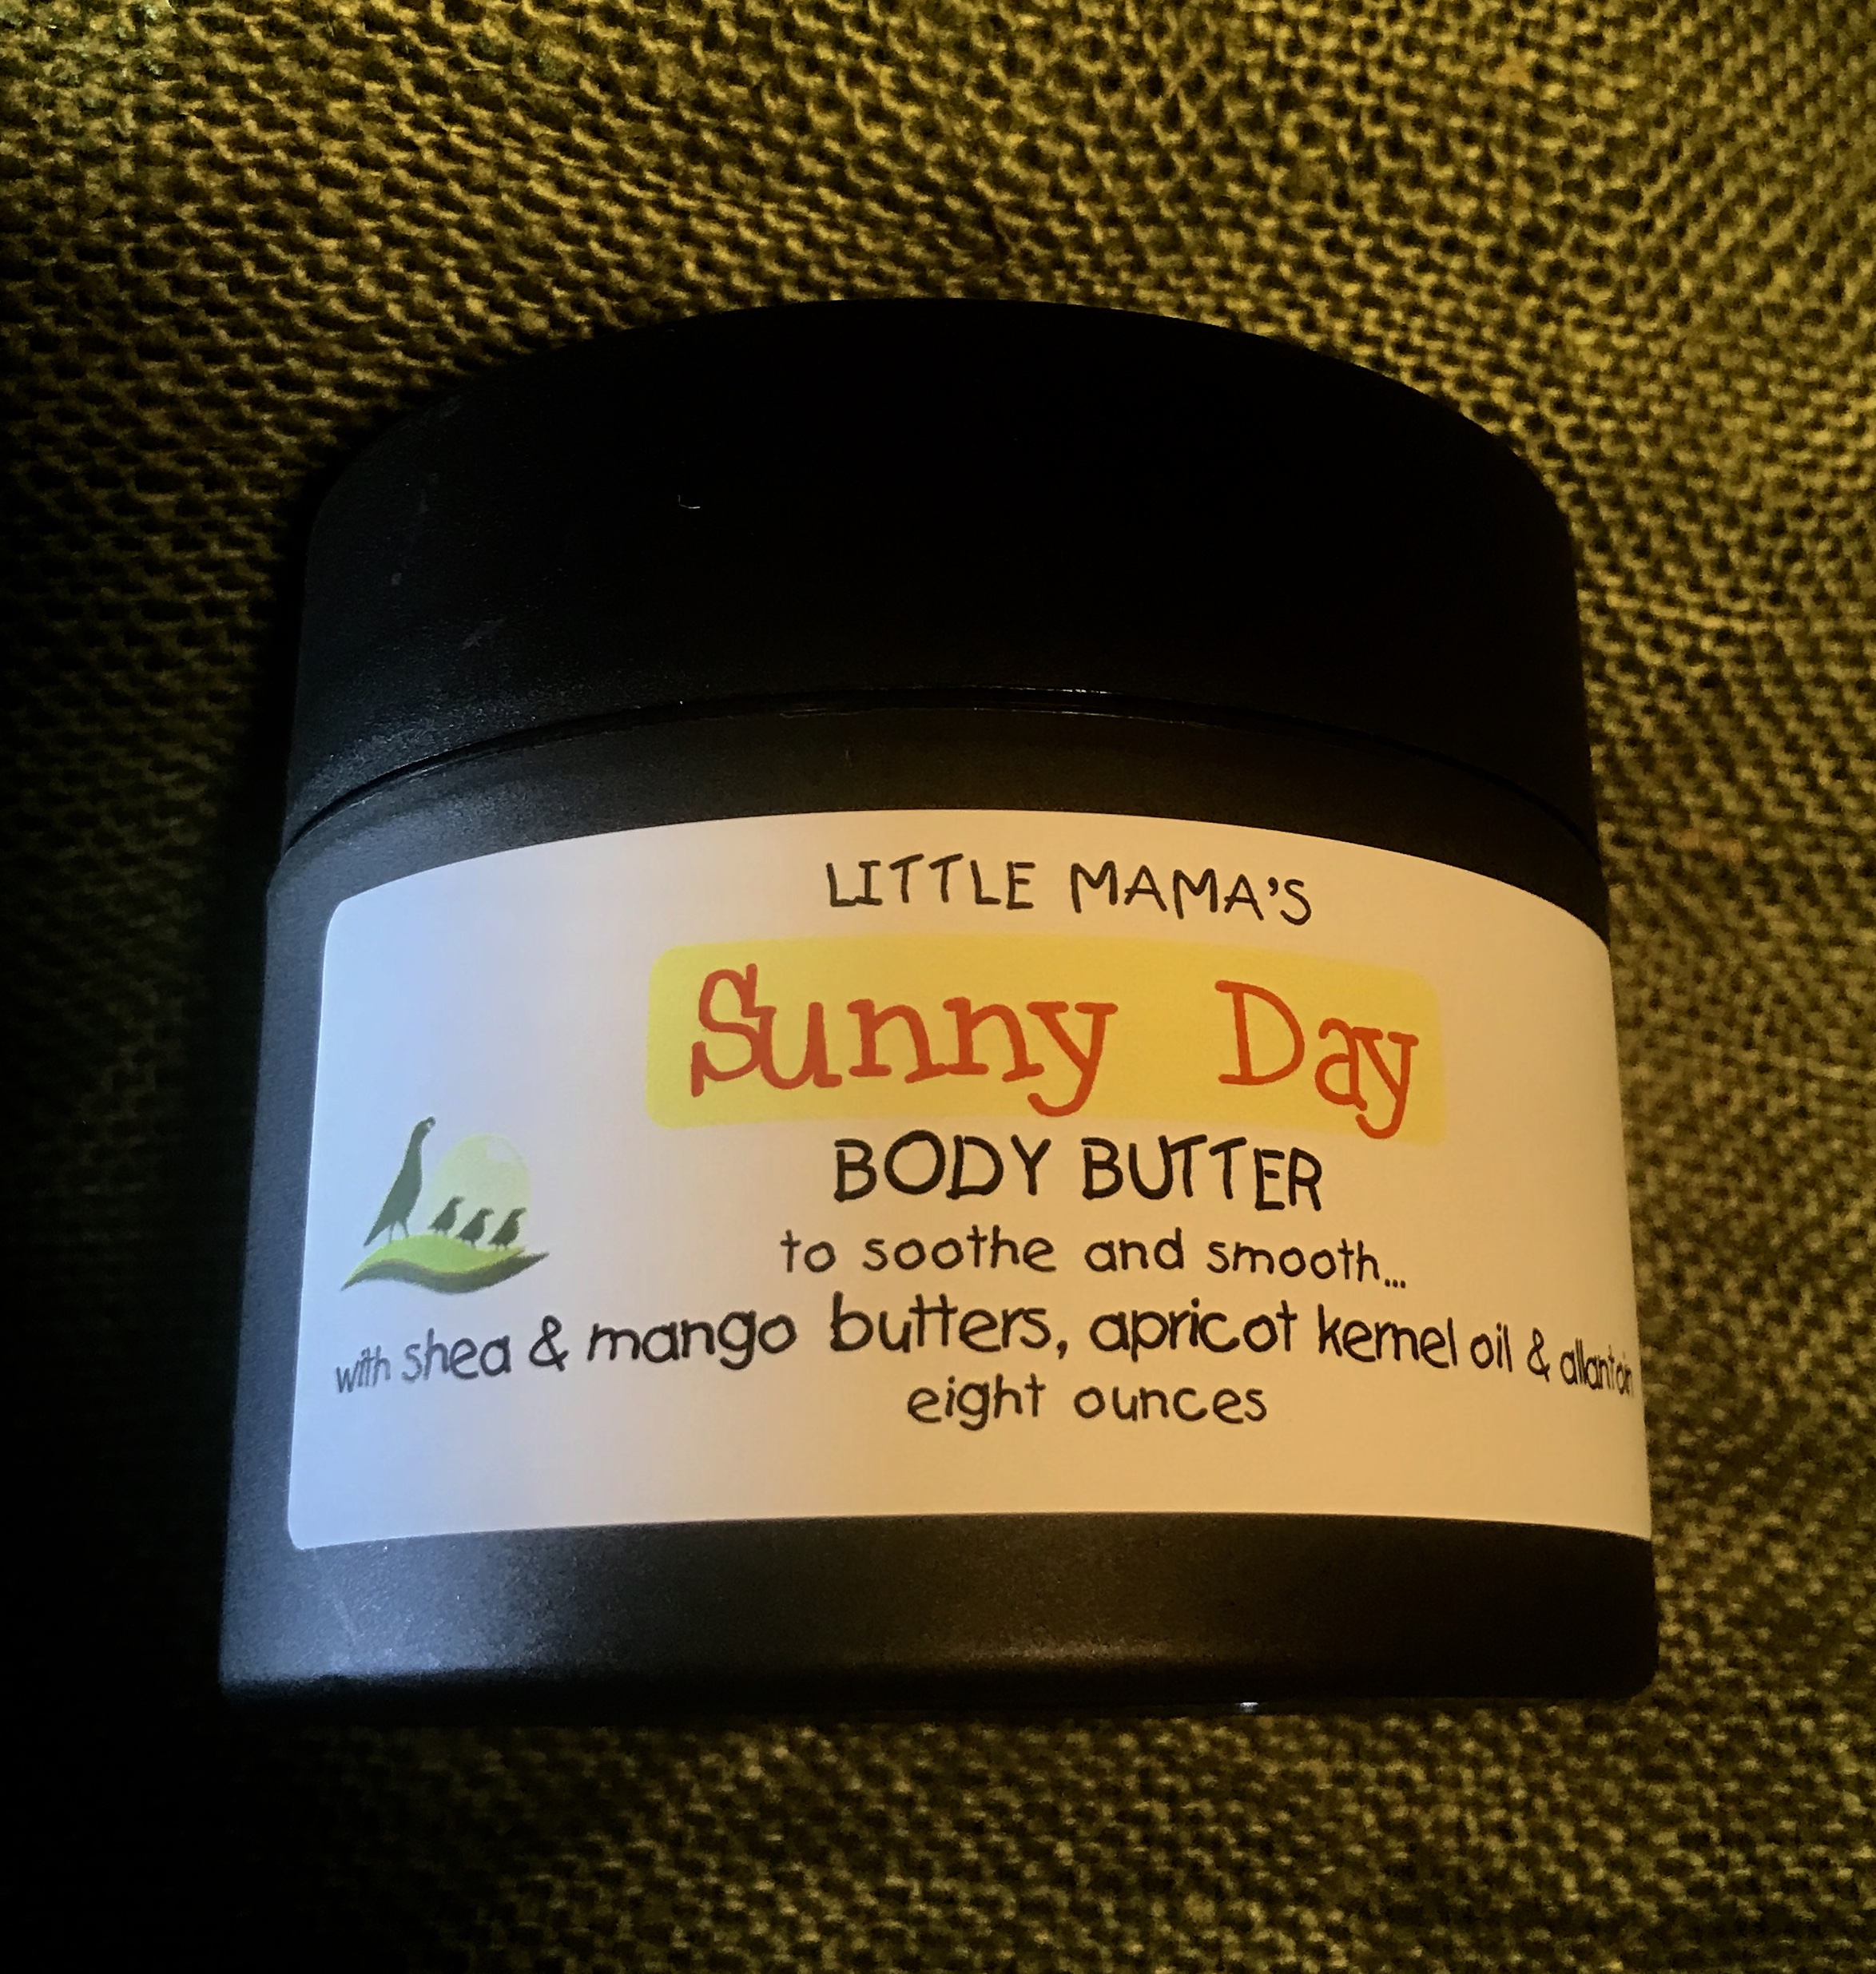 Sunny Day Body Butter